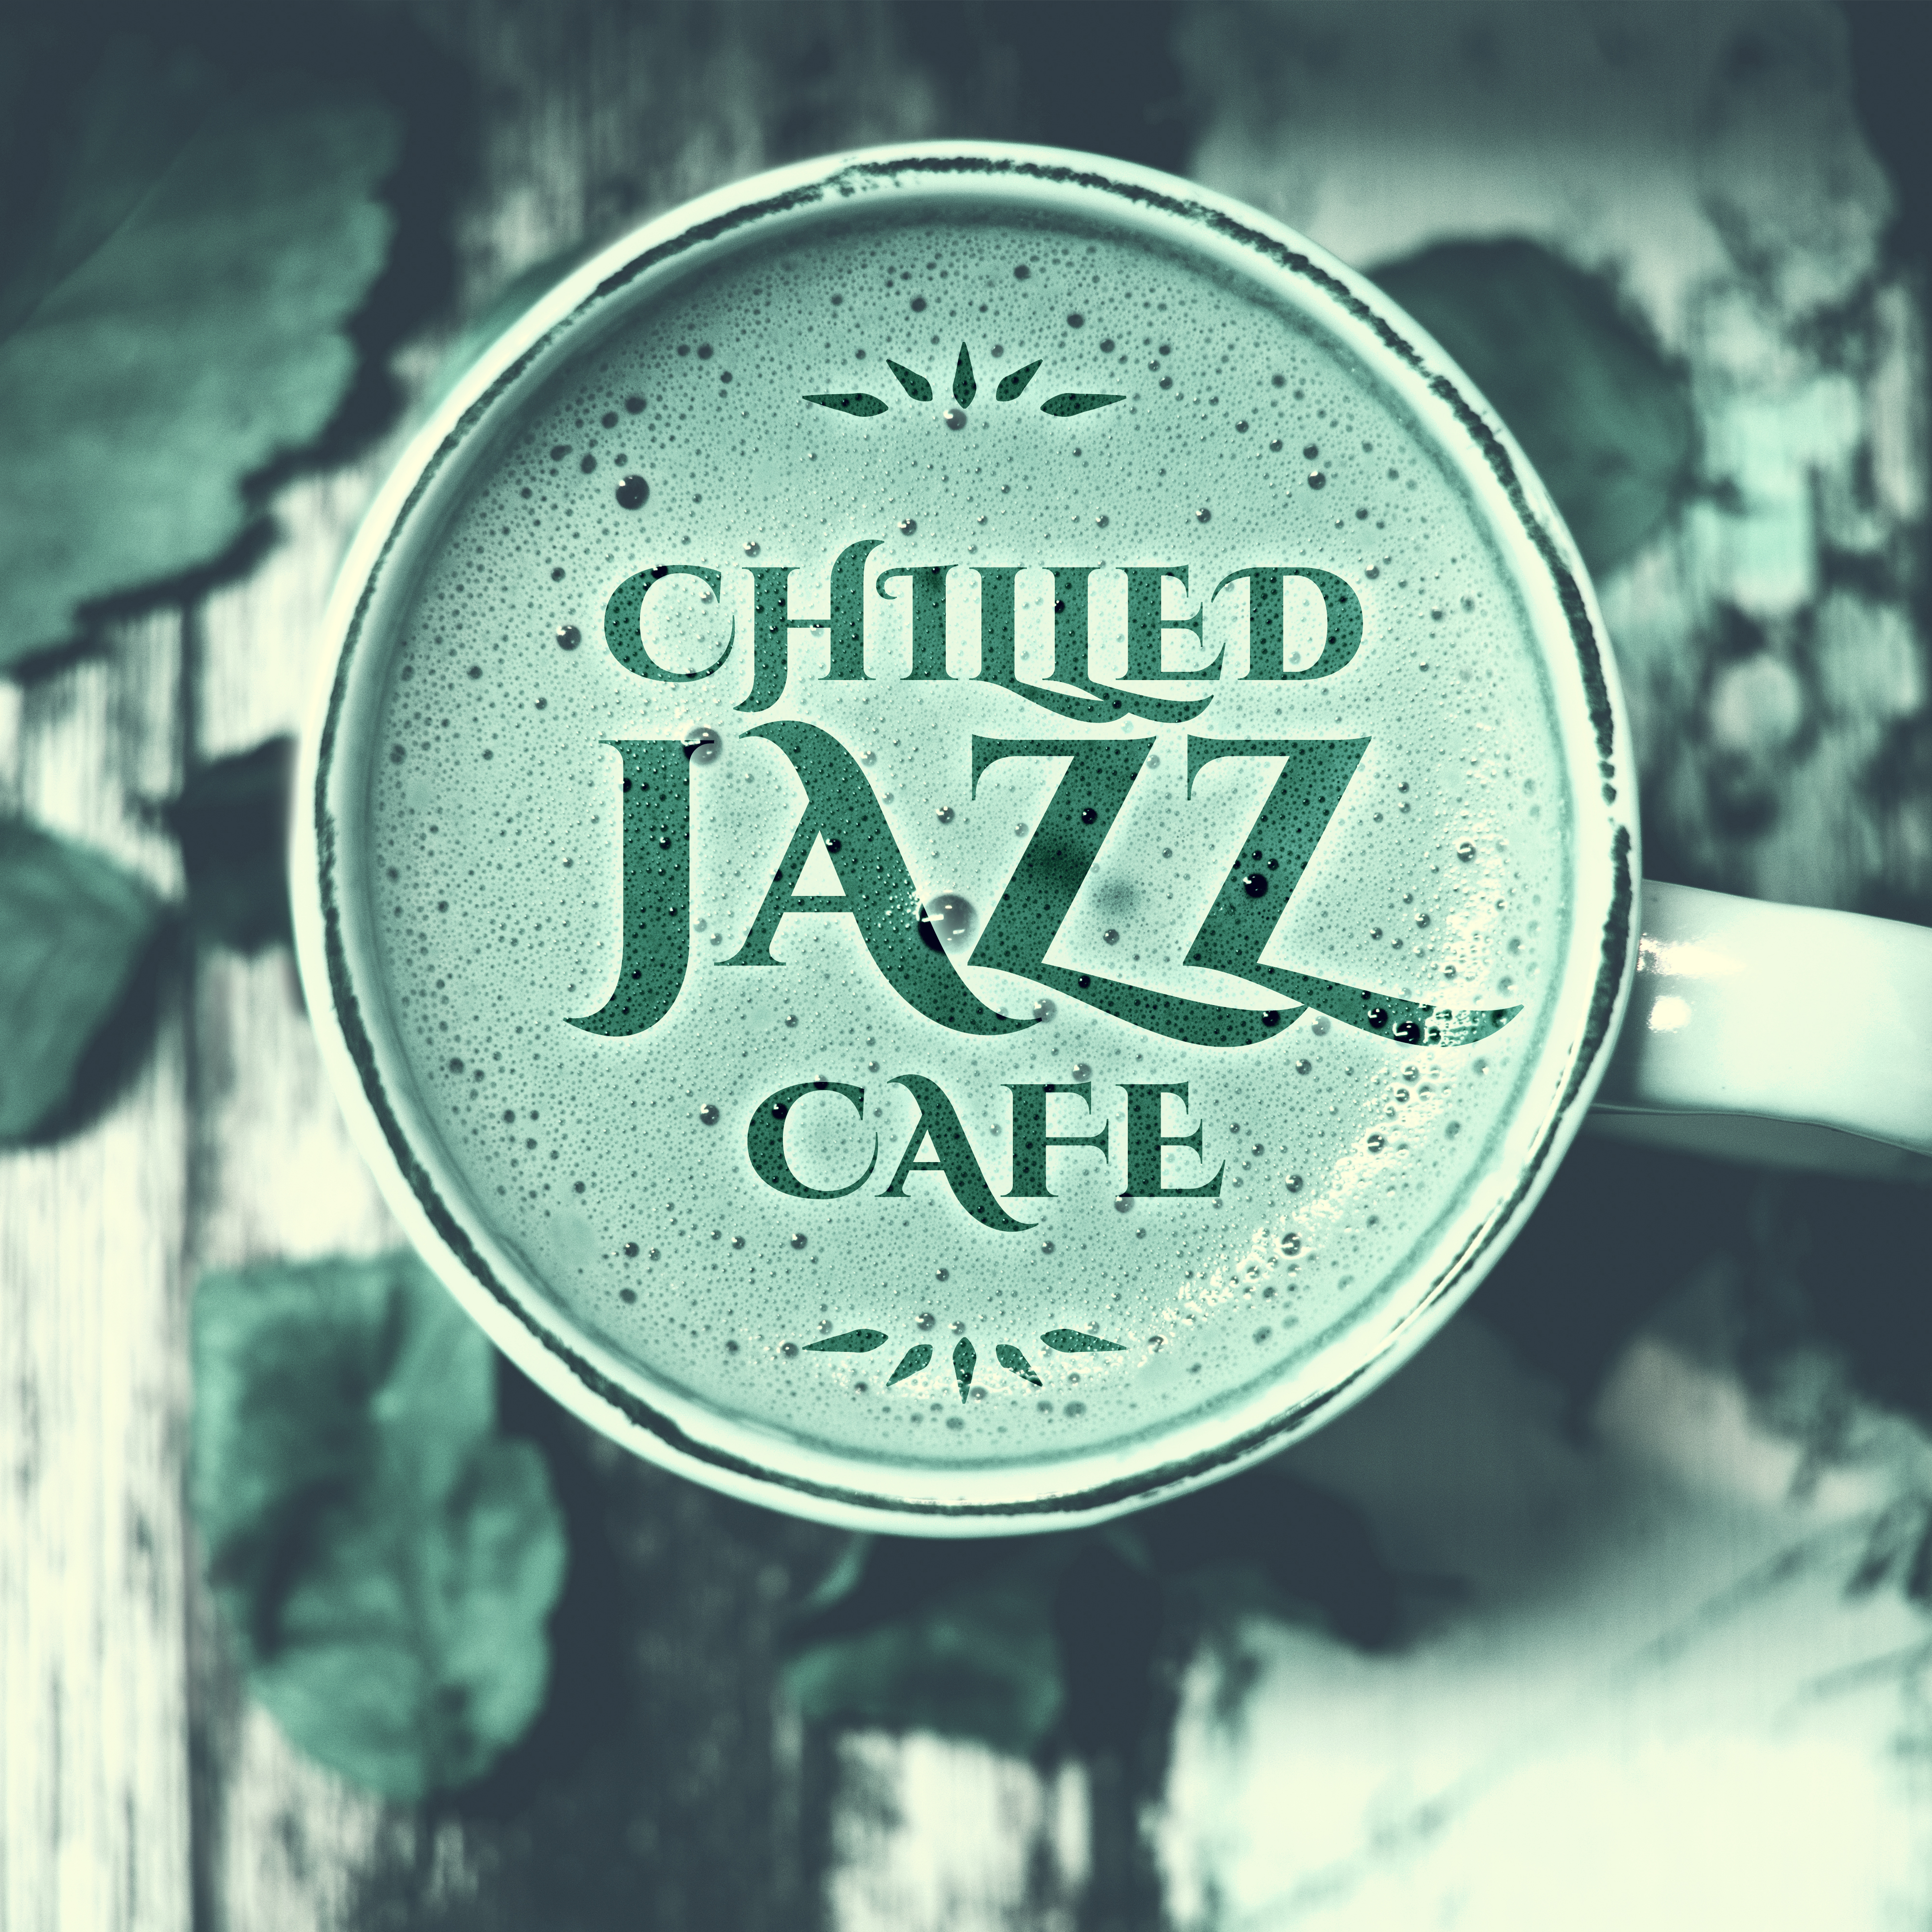 Chilled Jazz Cafe  Cafe Lounge, Instrumental Piano, Mellow Jazz, Ambient Lounge, Peaceful Sounds of Jazz